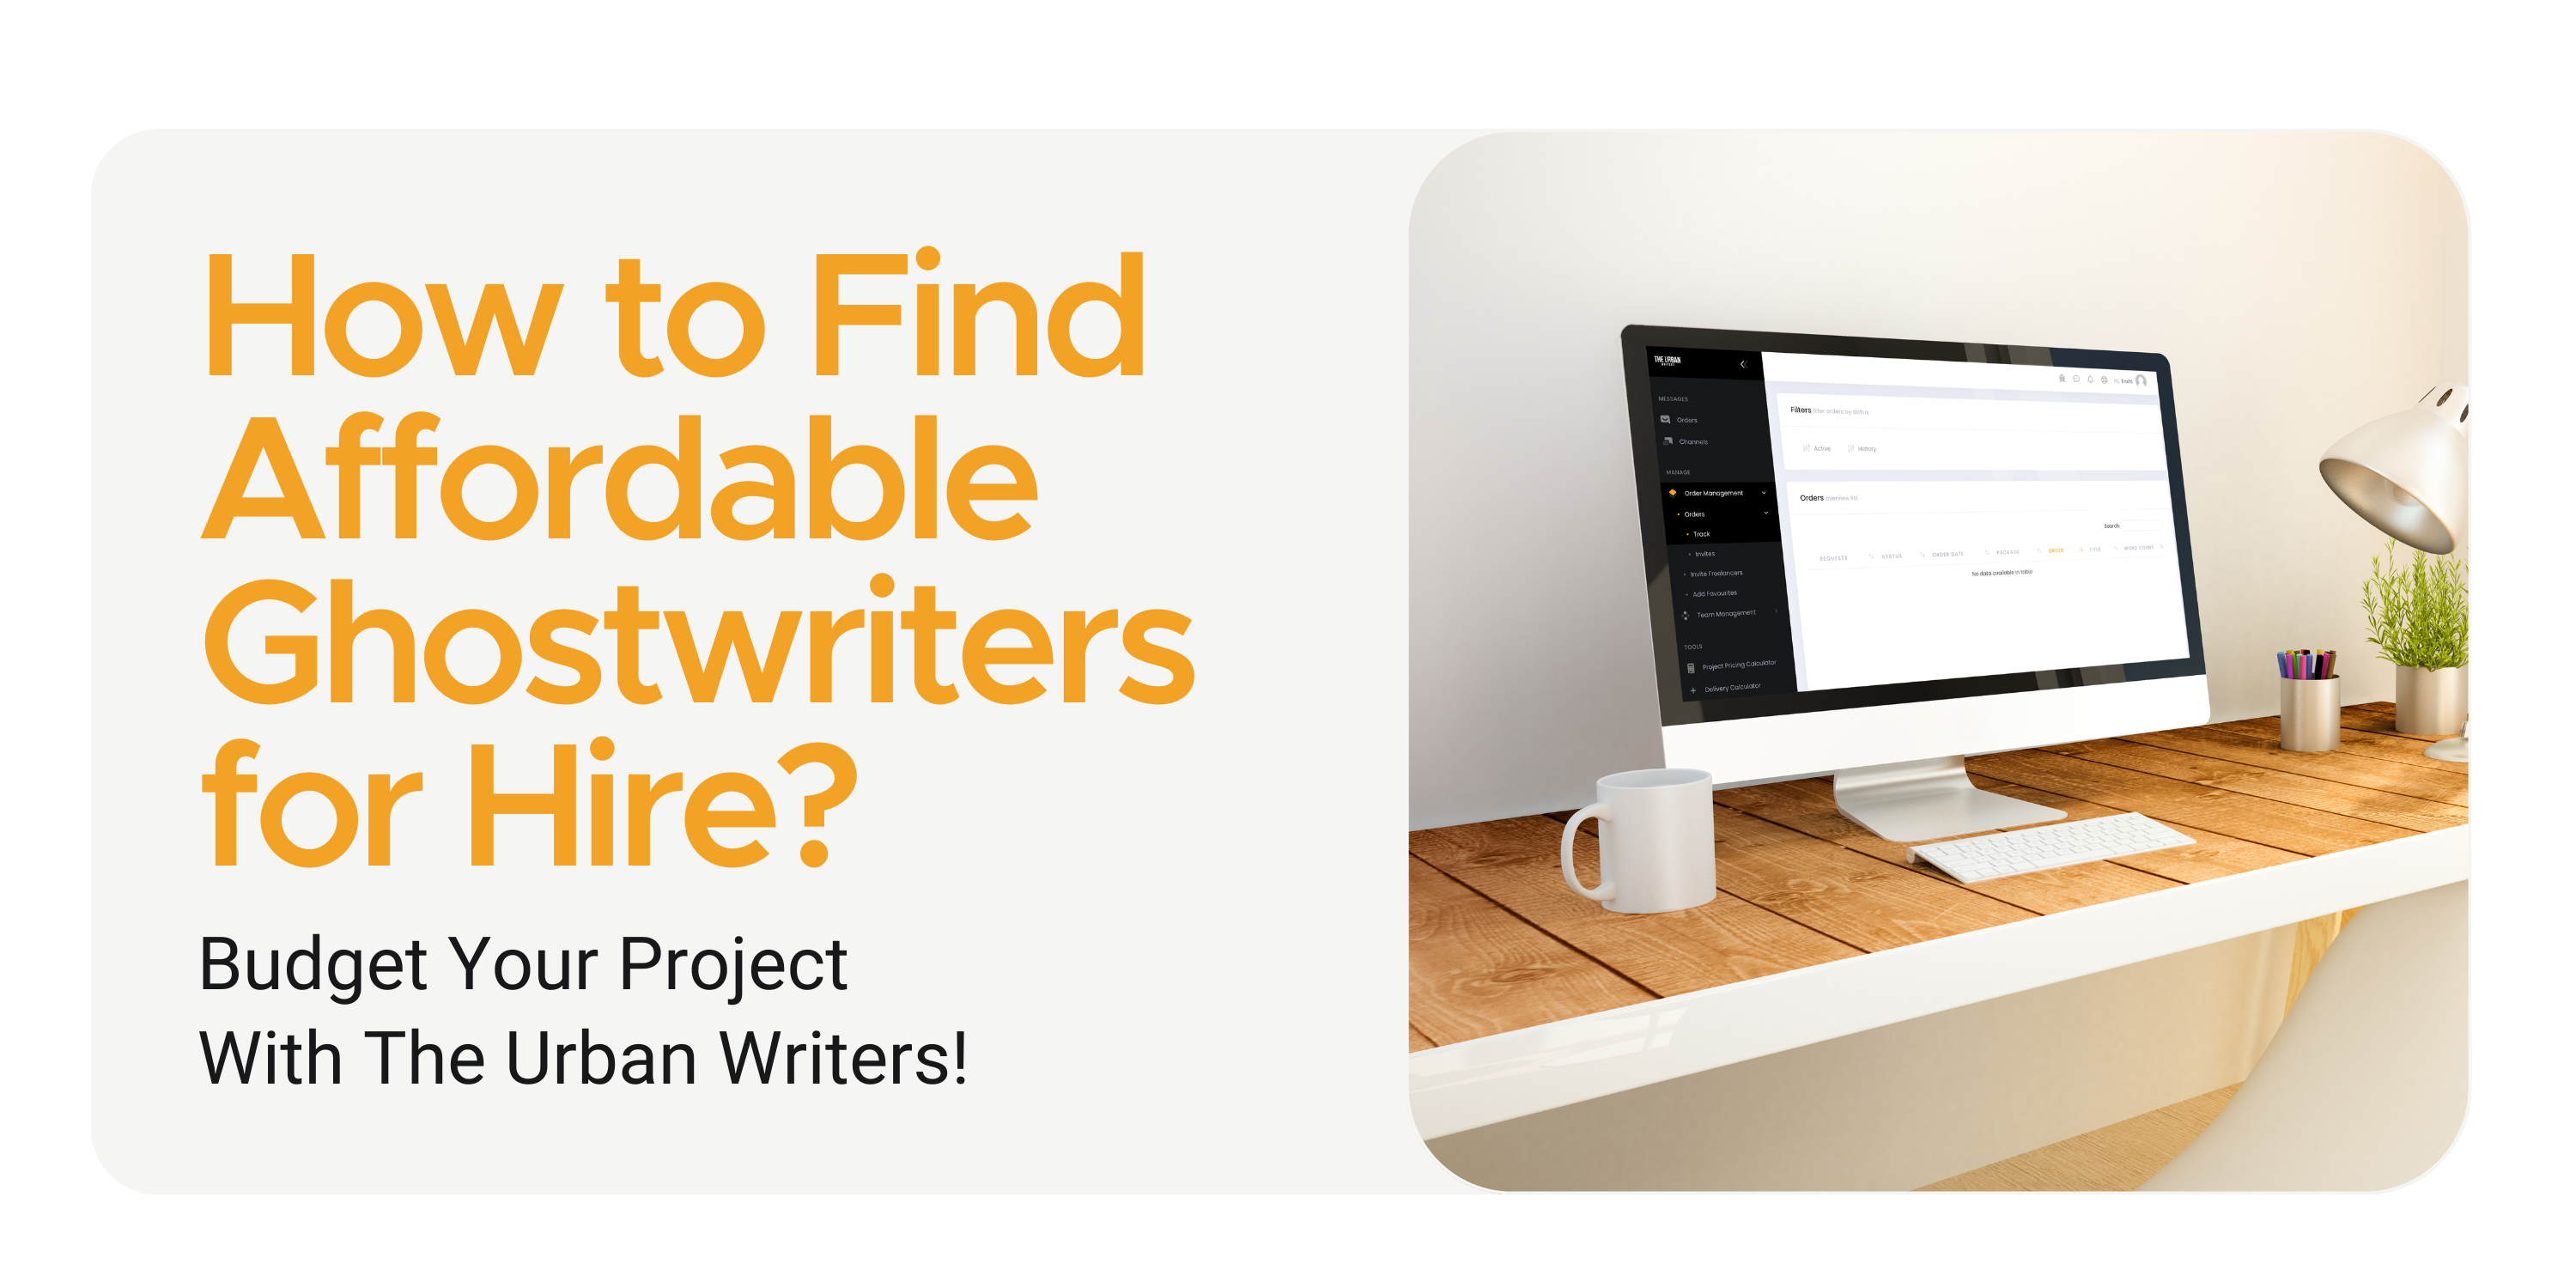 Ghostwriters for hire